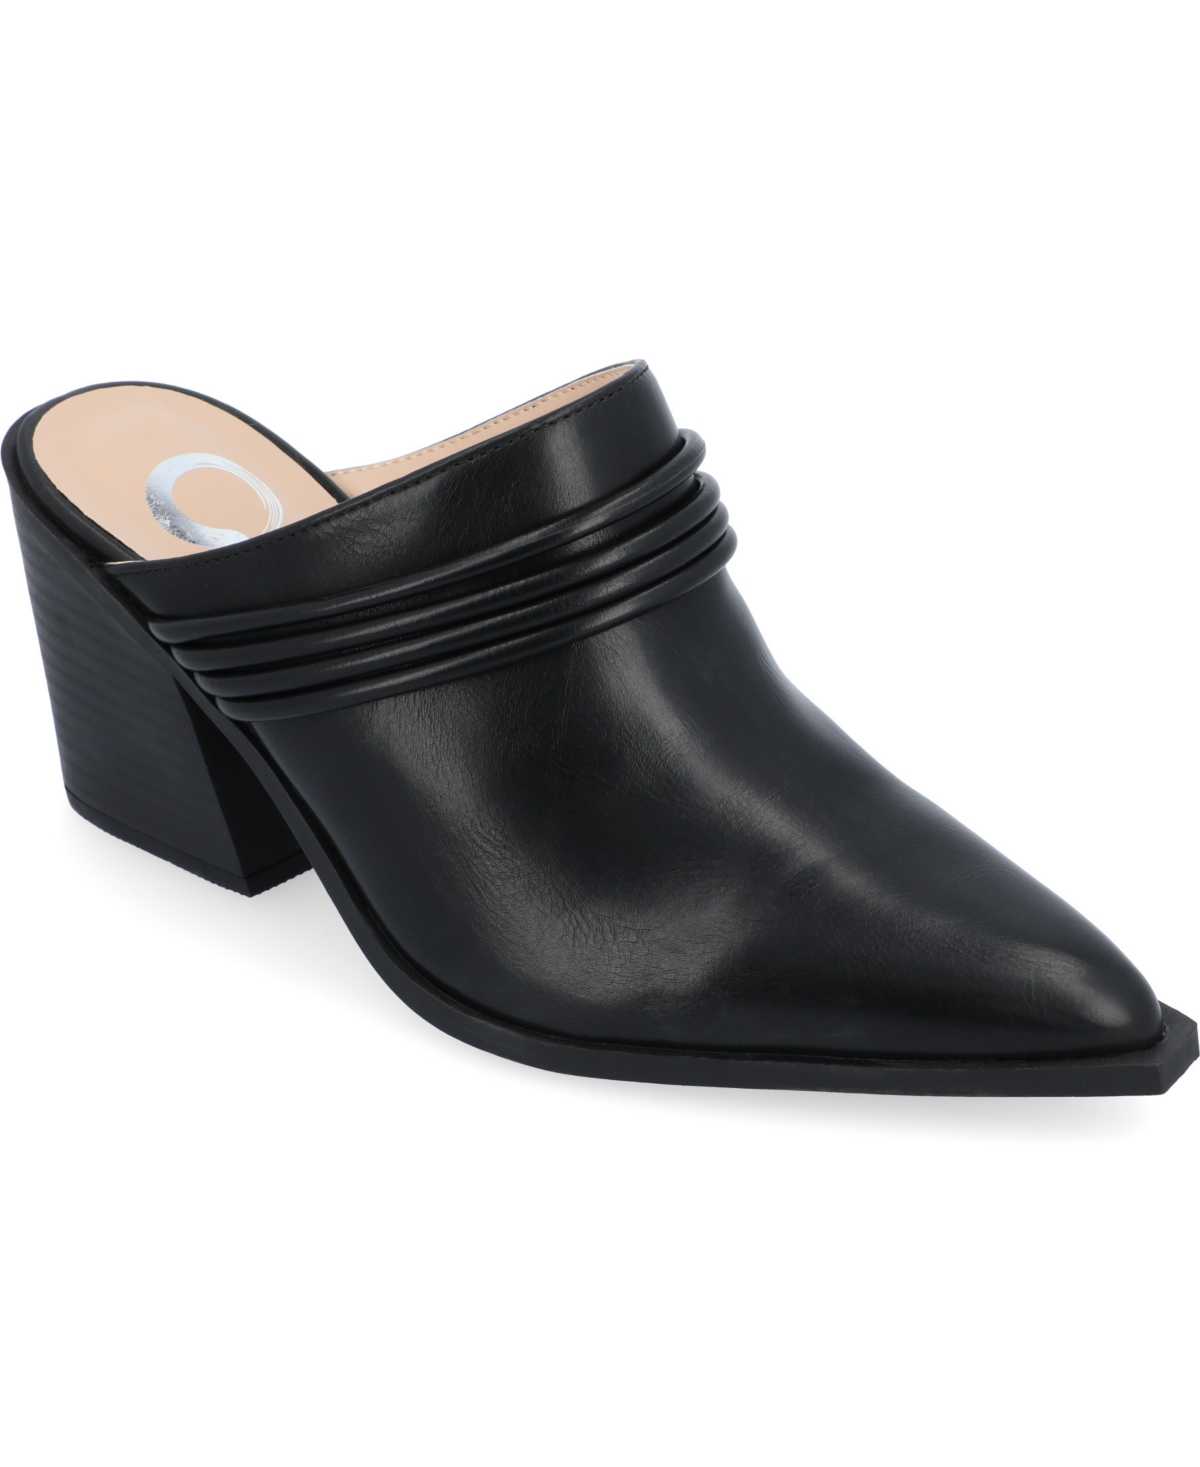 JOURNEE COLLECTION WOMEN'S JINNY BANDED MULES